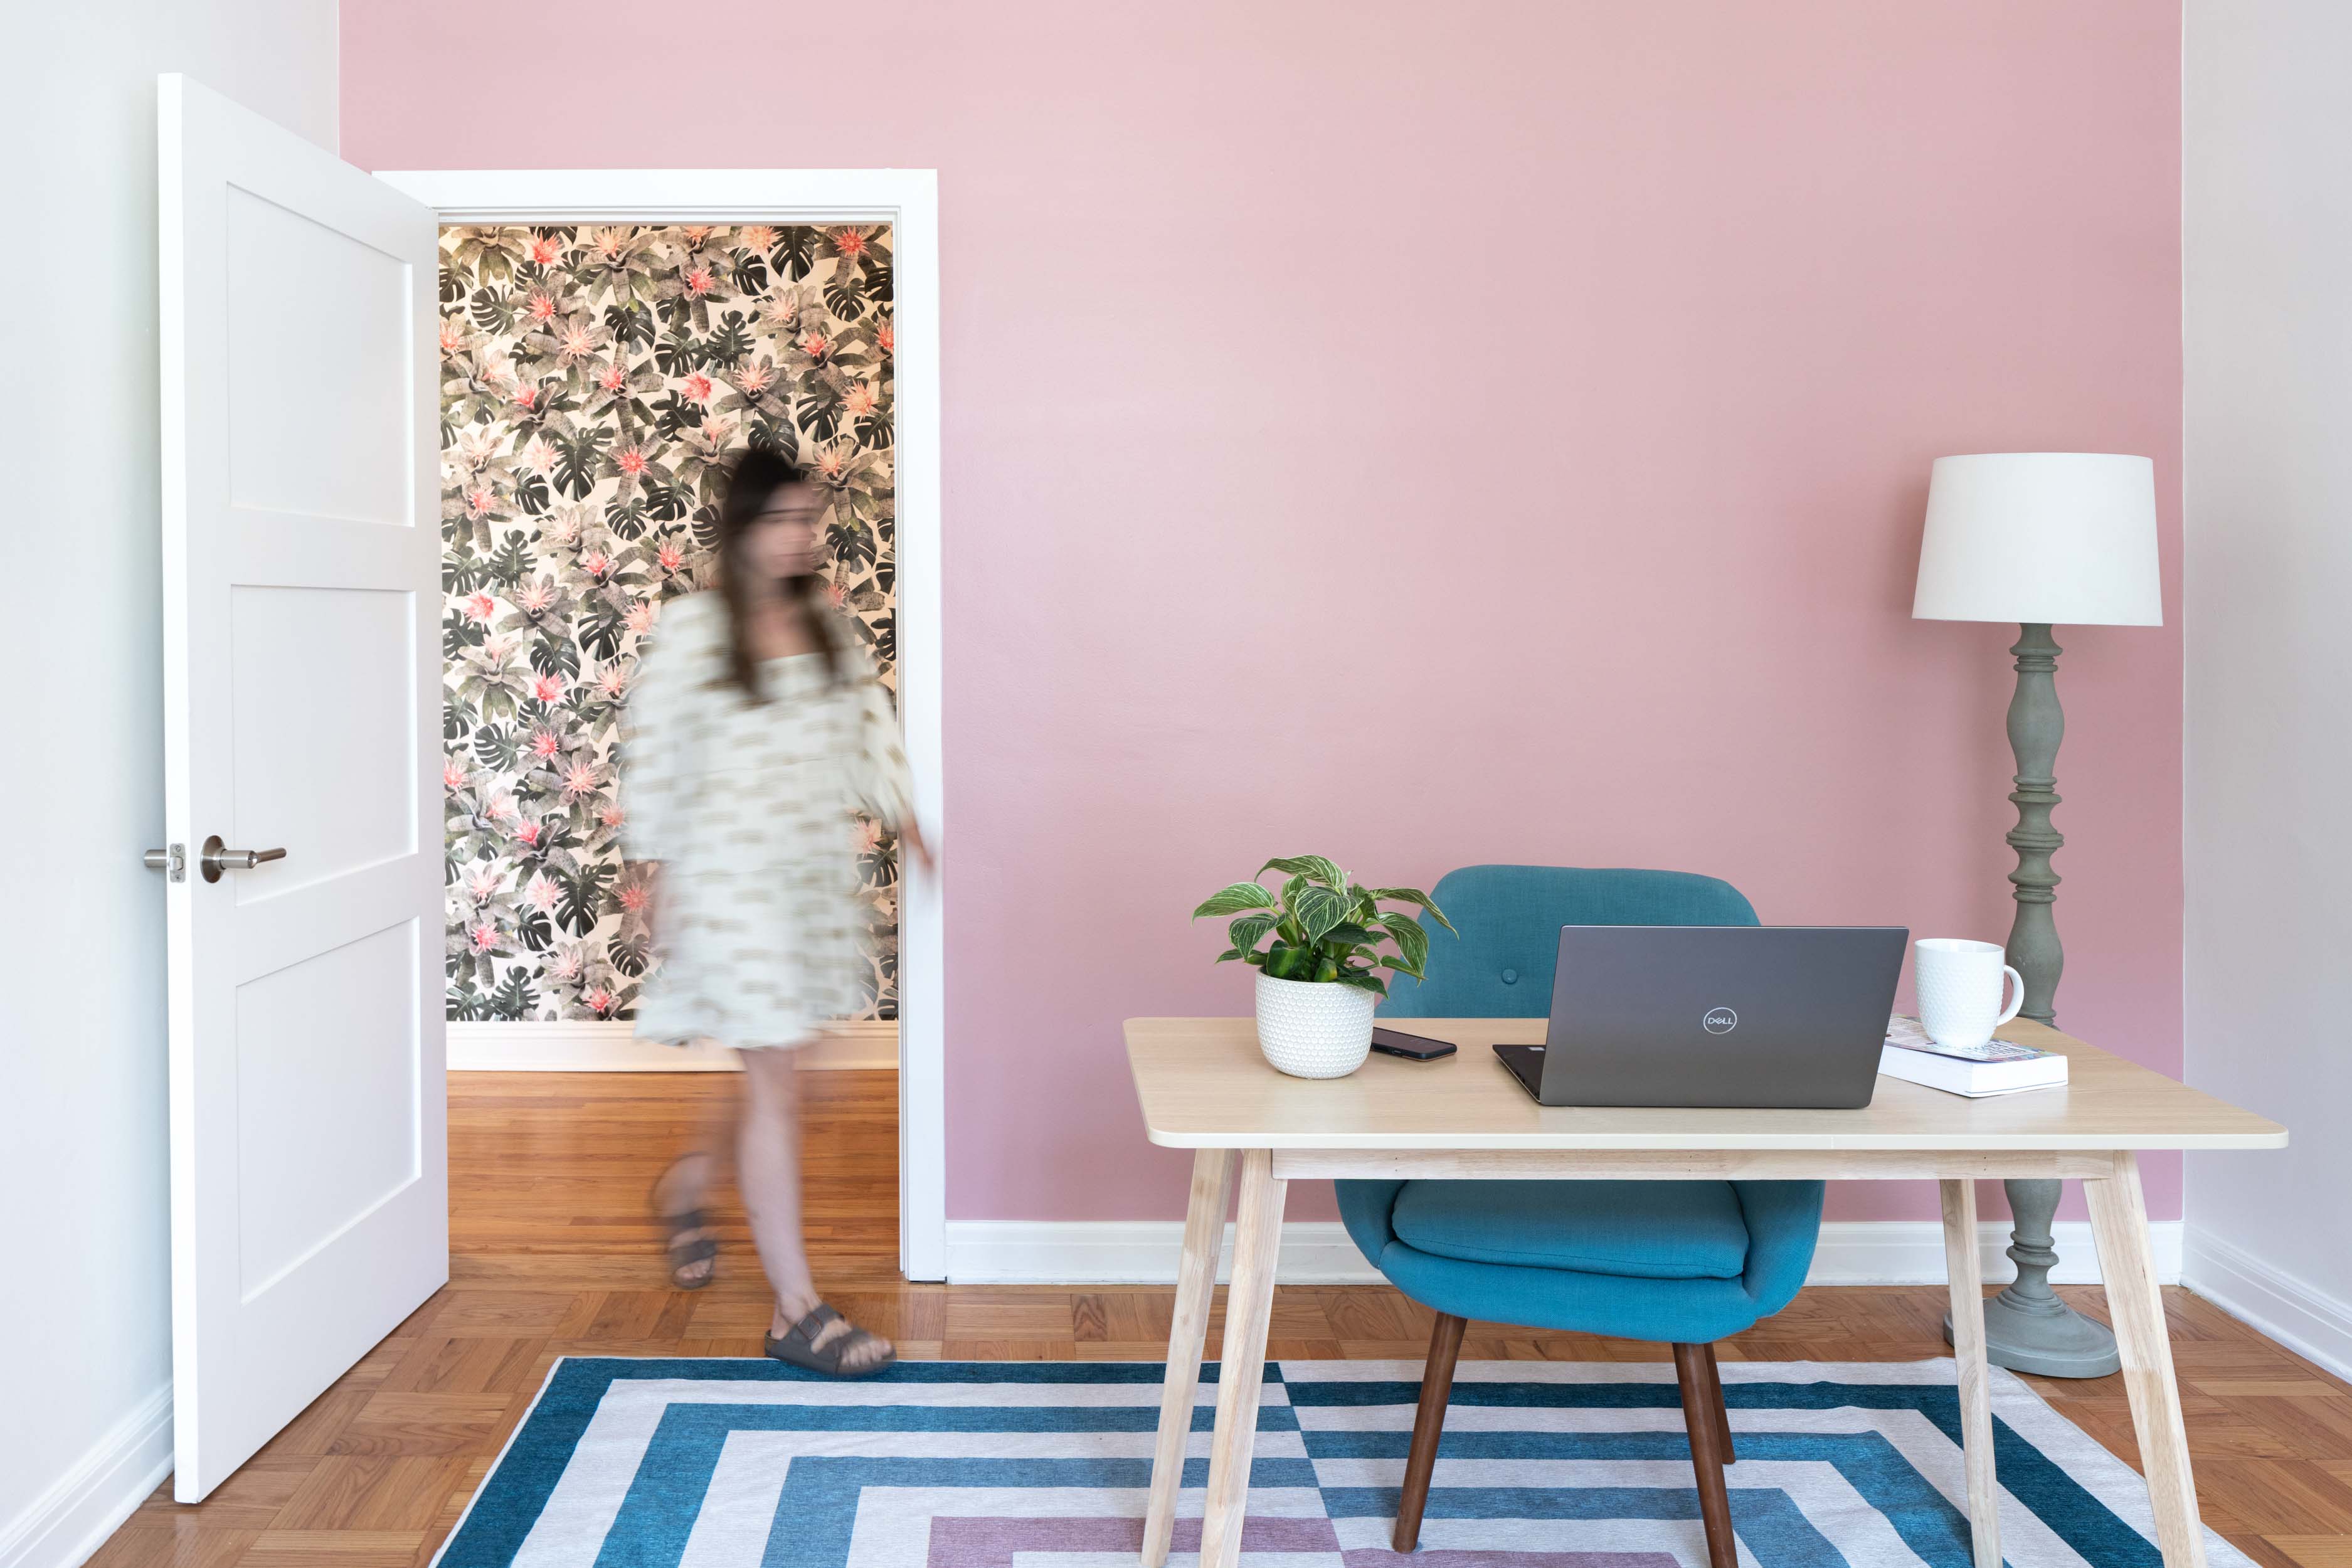 Woman walking into small office space with table, chair, and laptop against a pink wall